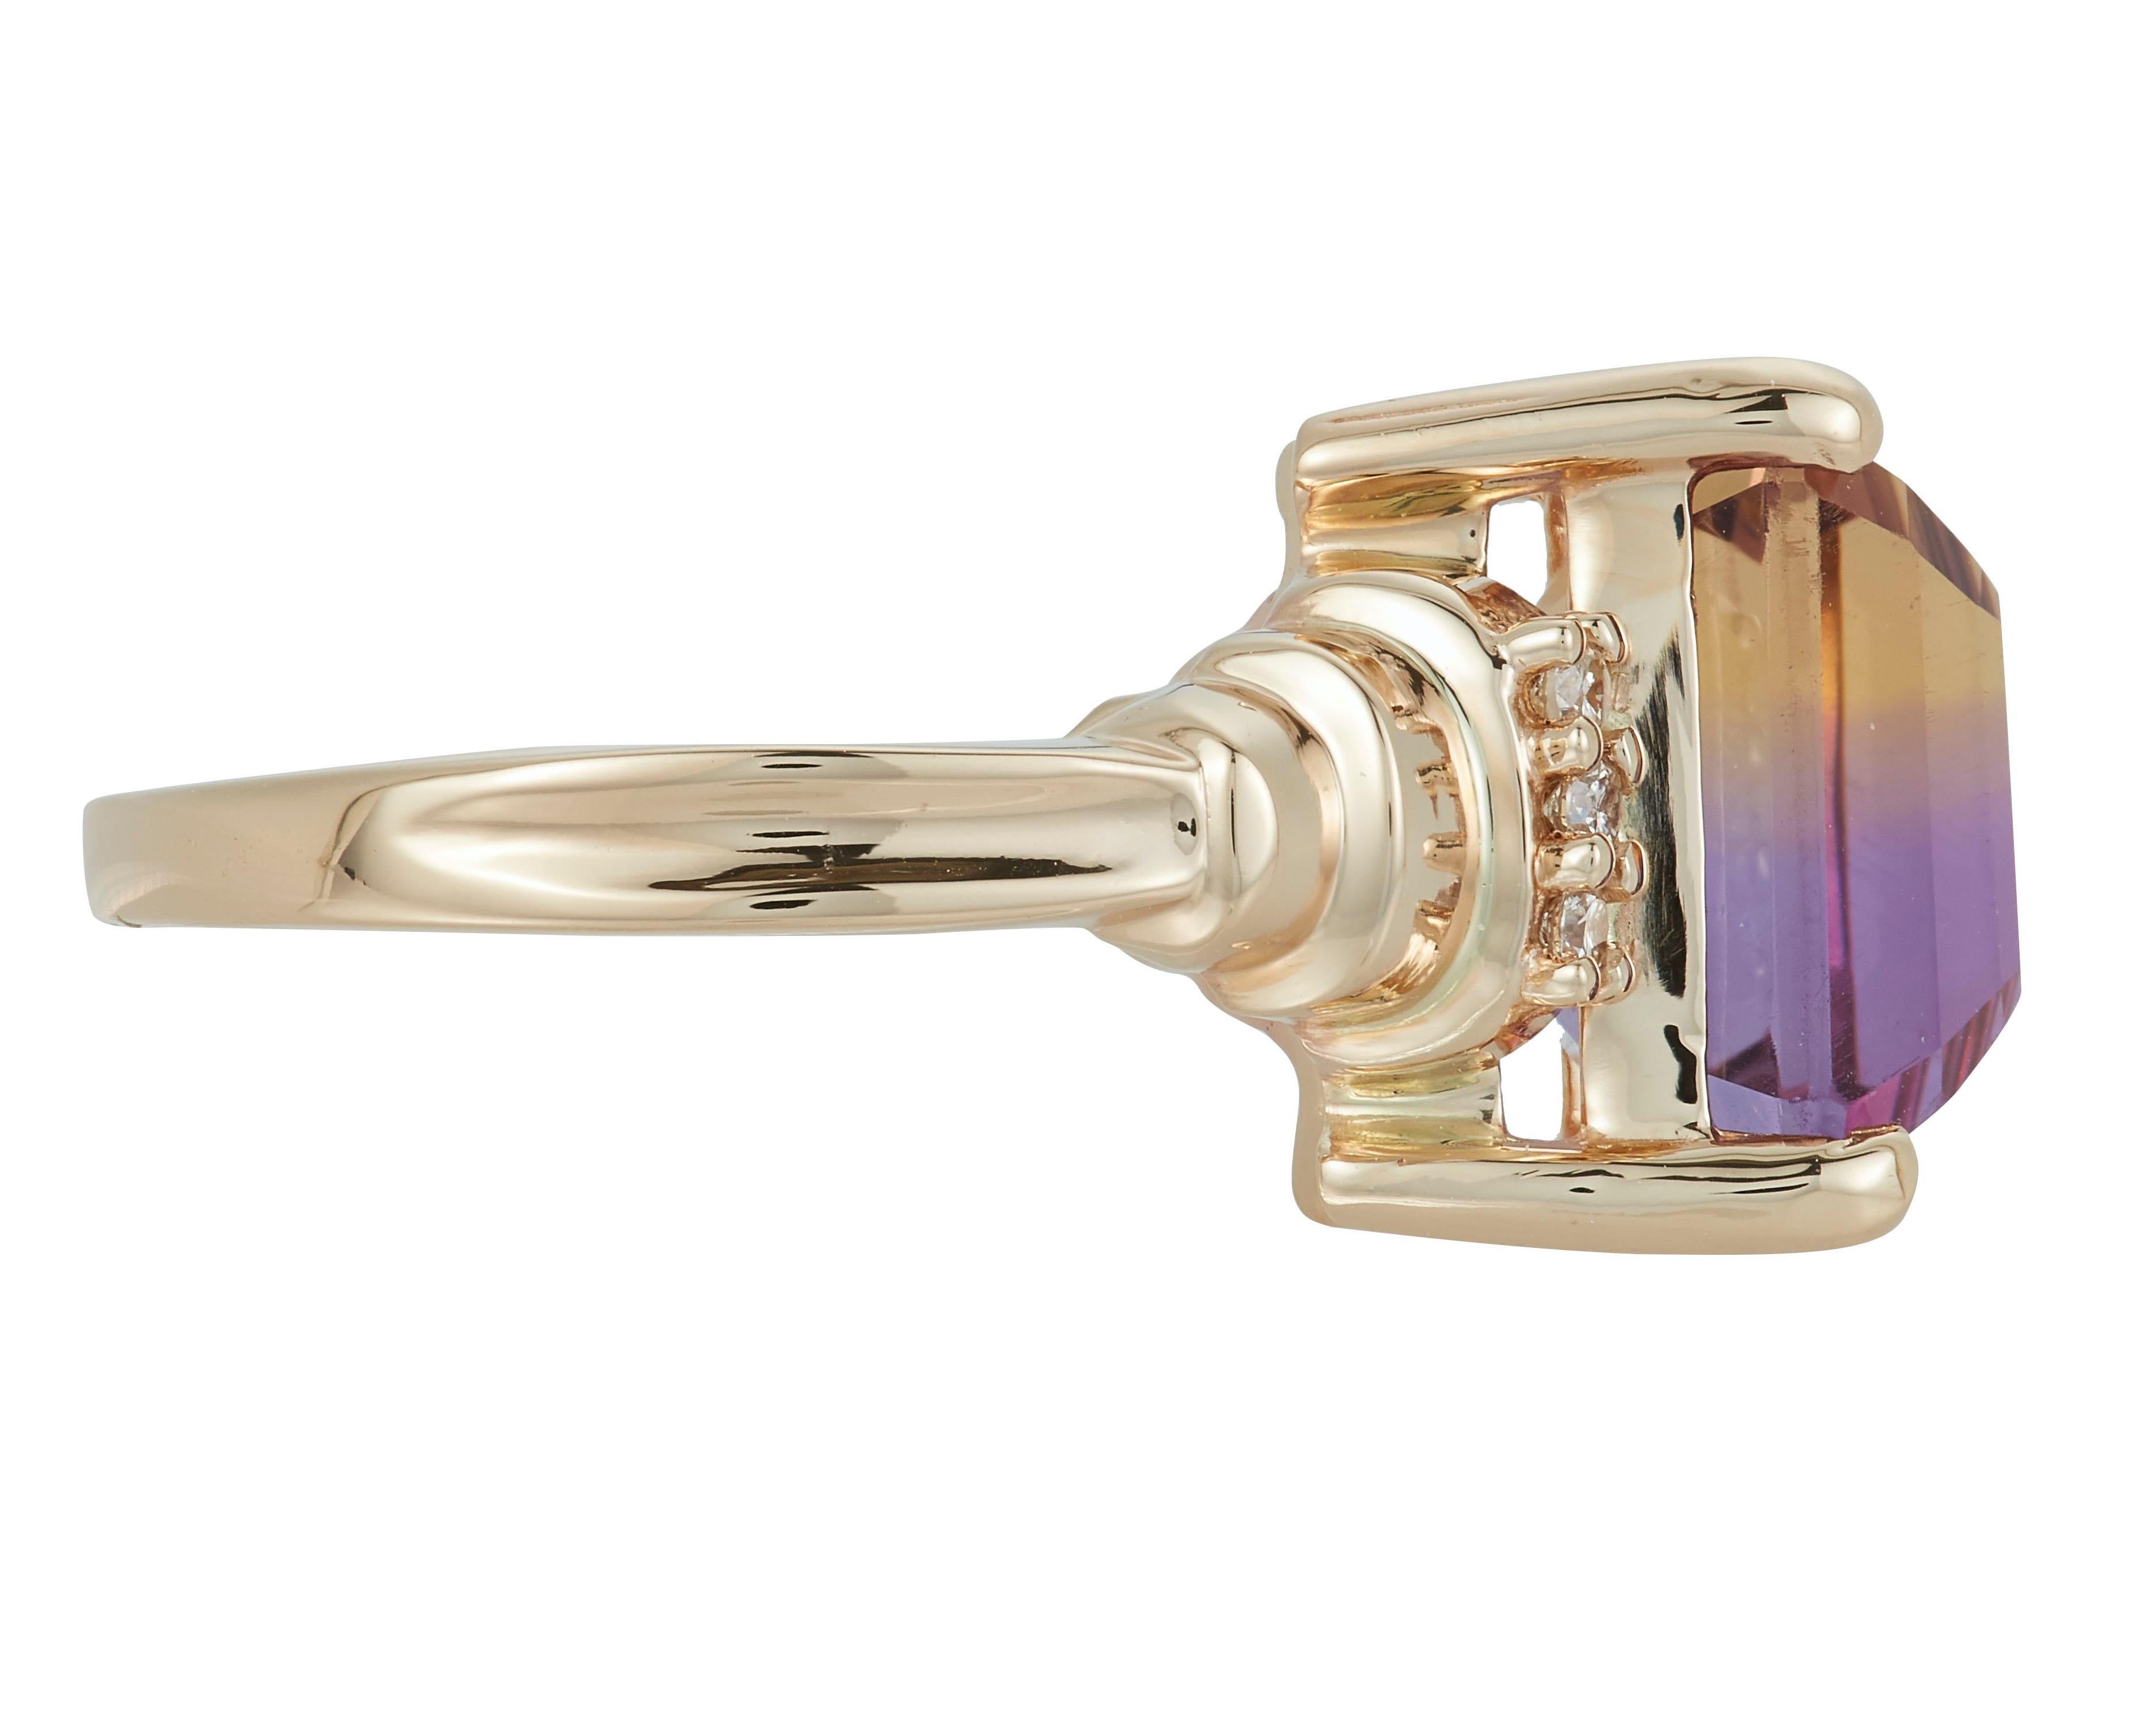 14K Yellow Gold
1 Radiant Cut Ametrine at 7.71 Carats- Measuring 11.5 x 11.2 mm
6 Round White Diamonds at 0.06 Carats - Color: H-I /Clarity: SI

Alberto offers complimentary sizing on all rings.

Fine one-of-a-kind craftsmanship meets incredible